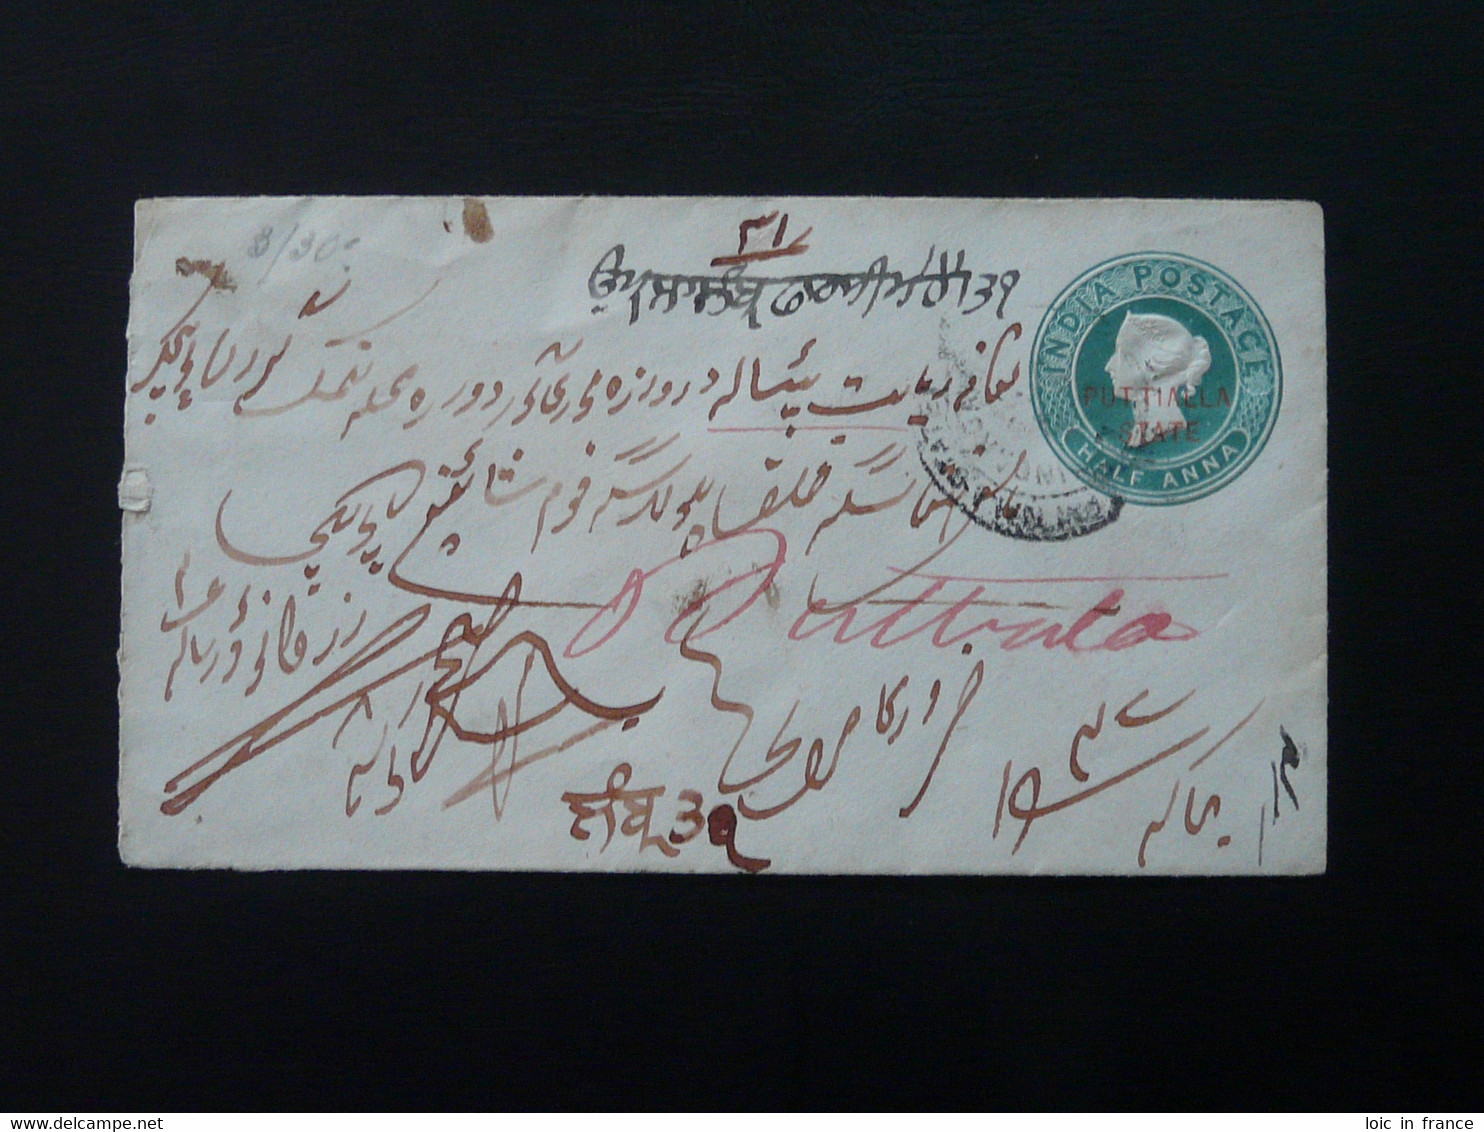 Entier Postal Stationery Patiala State Inde India Around 1900 - Patiala